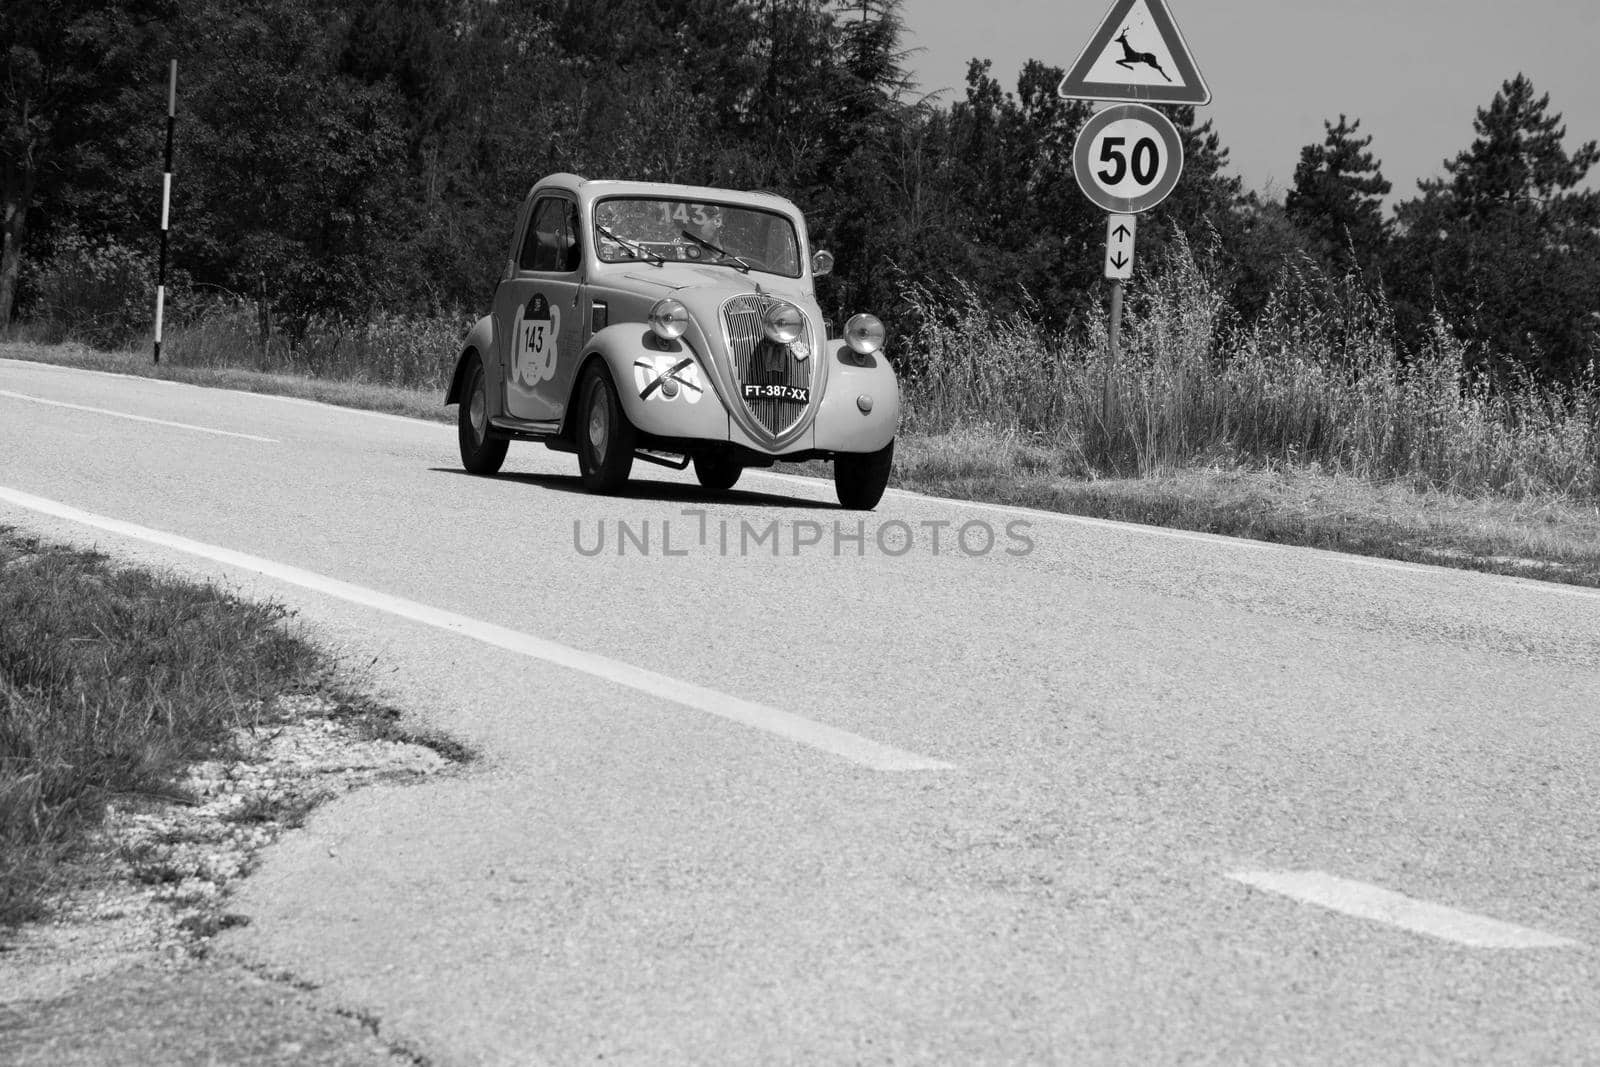 FIAT 500 B TOPOLINO 1948 on an old racing car in rally Mille Miglia 2022 the famous italian historical race (1927-1957 by massimocampanari